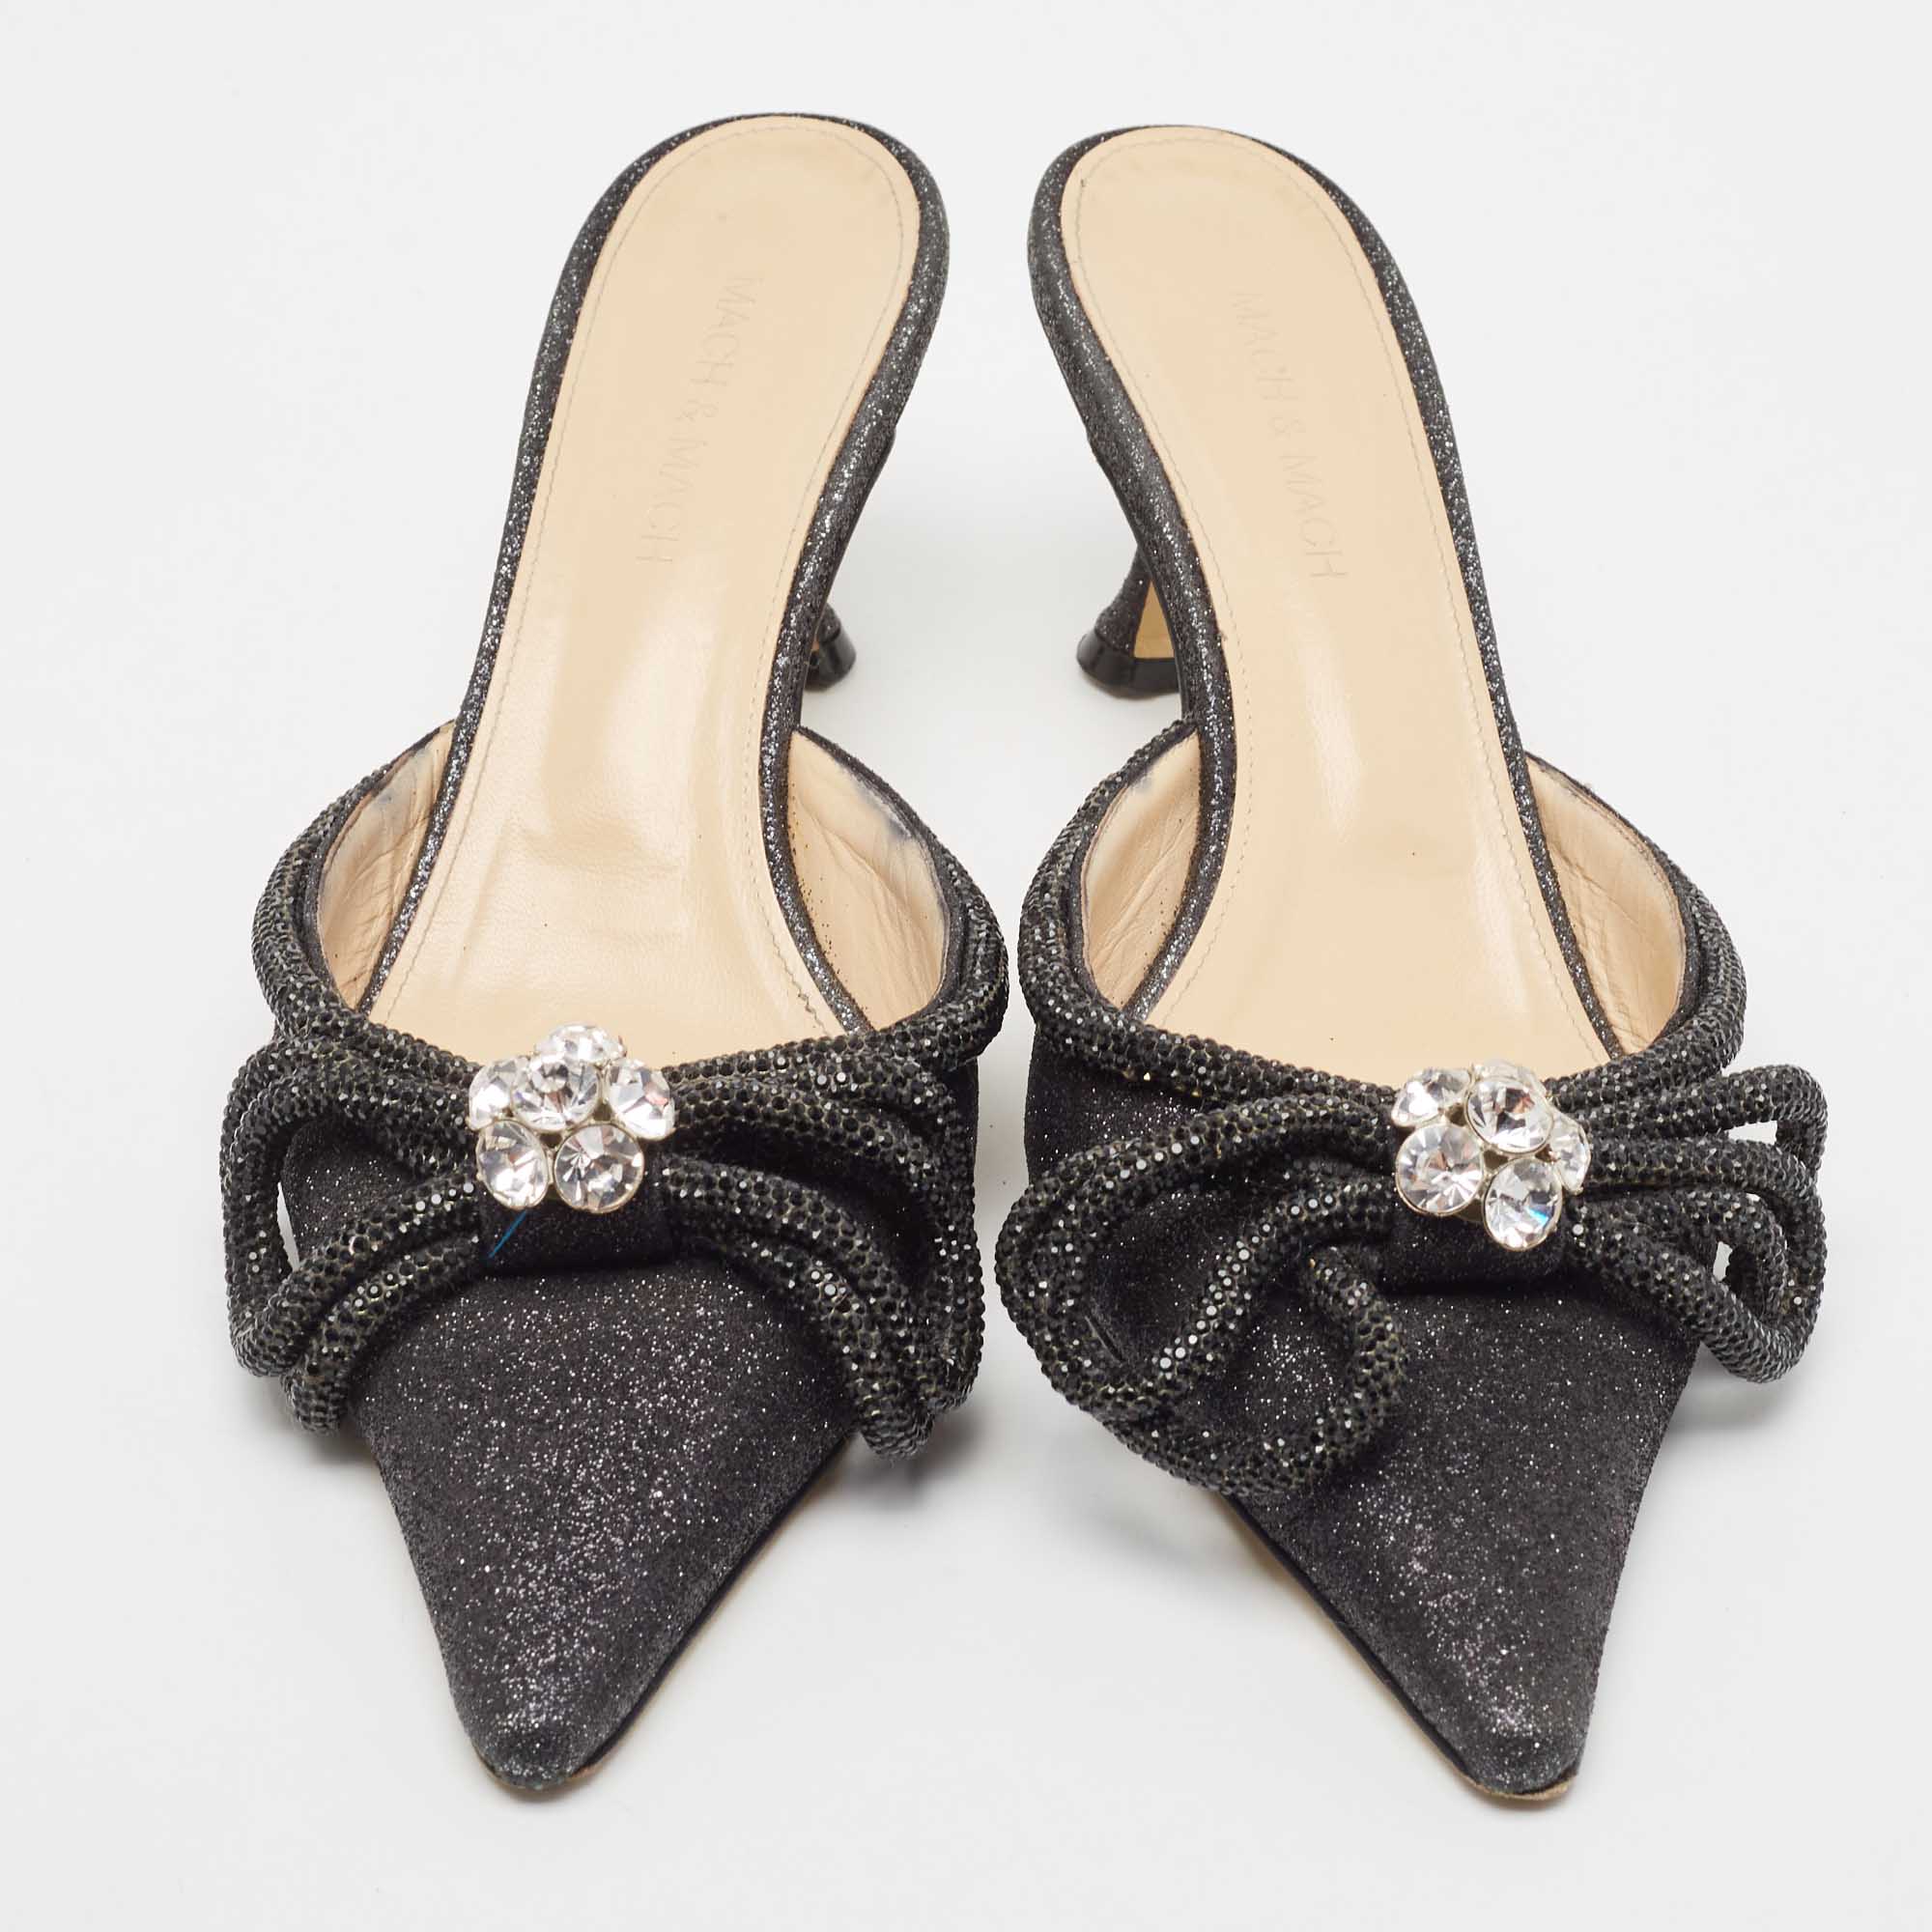 Mach & Mach Black Glitter Crystal Embellished Double Bow Mules Size 39